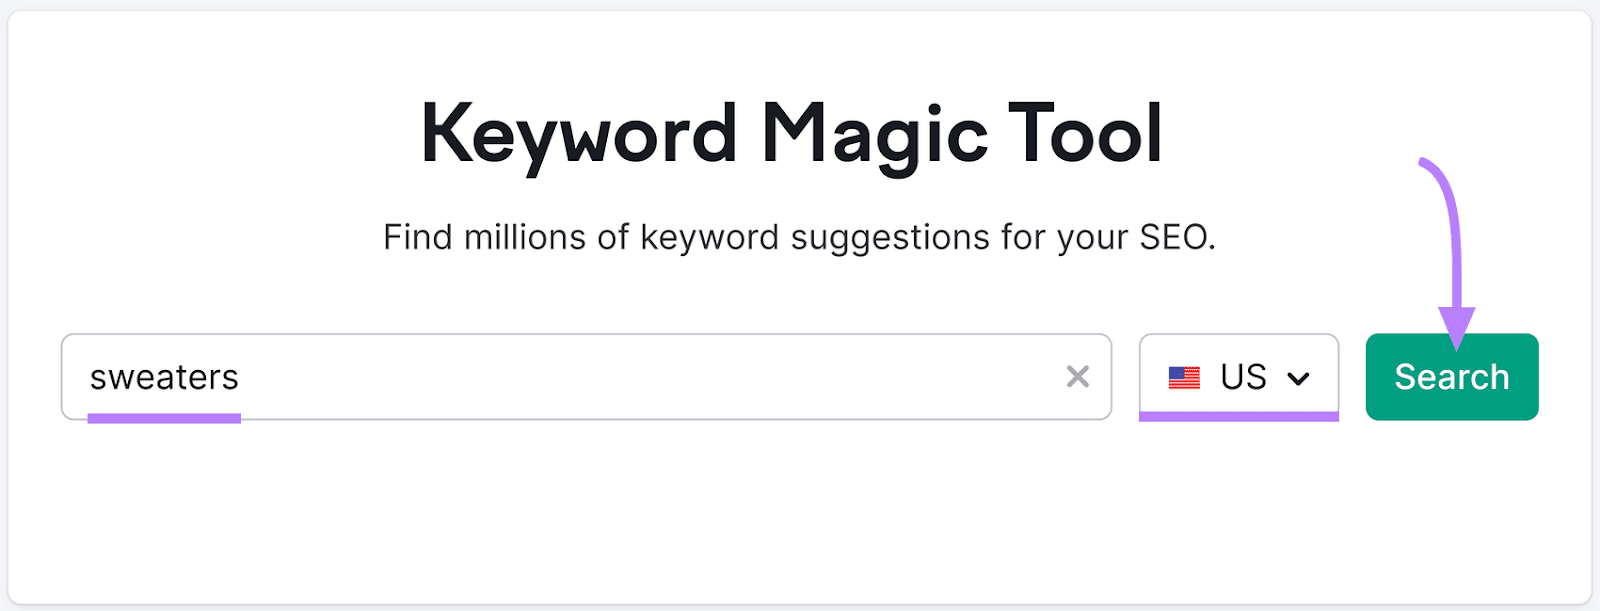 "sweaters" entered into the Keyword Magic Tool search bar